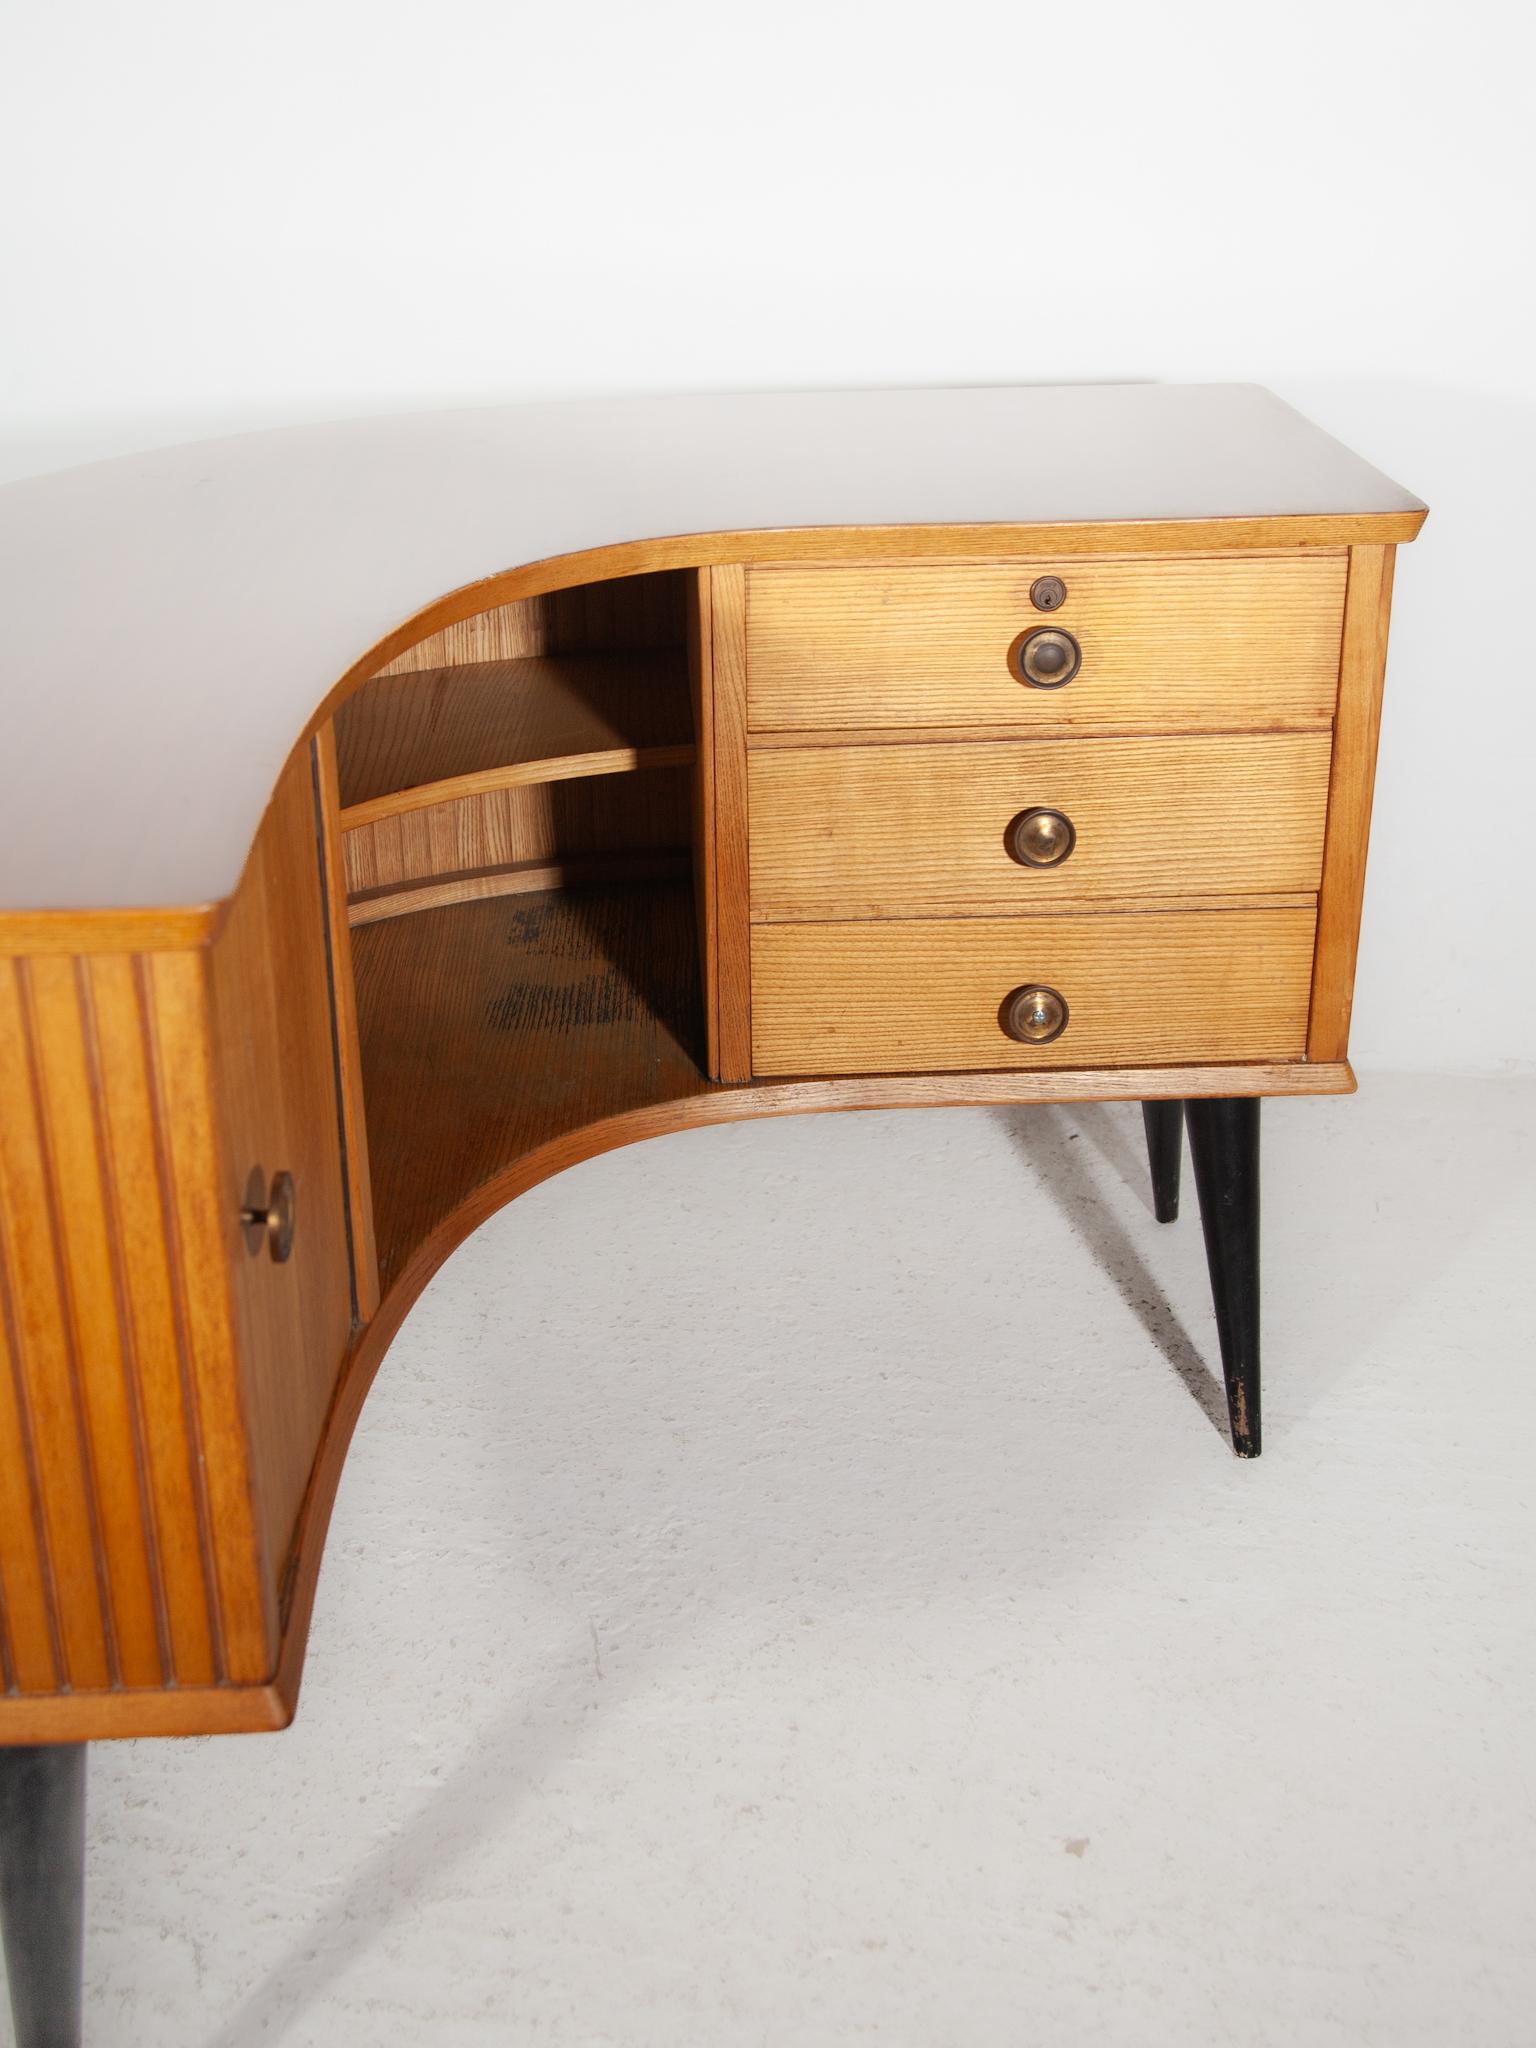 Boomerang Shaped Desk, Shop Counter, 1950s by Alfred Hendrickx For Sale 4